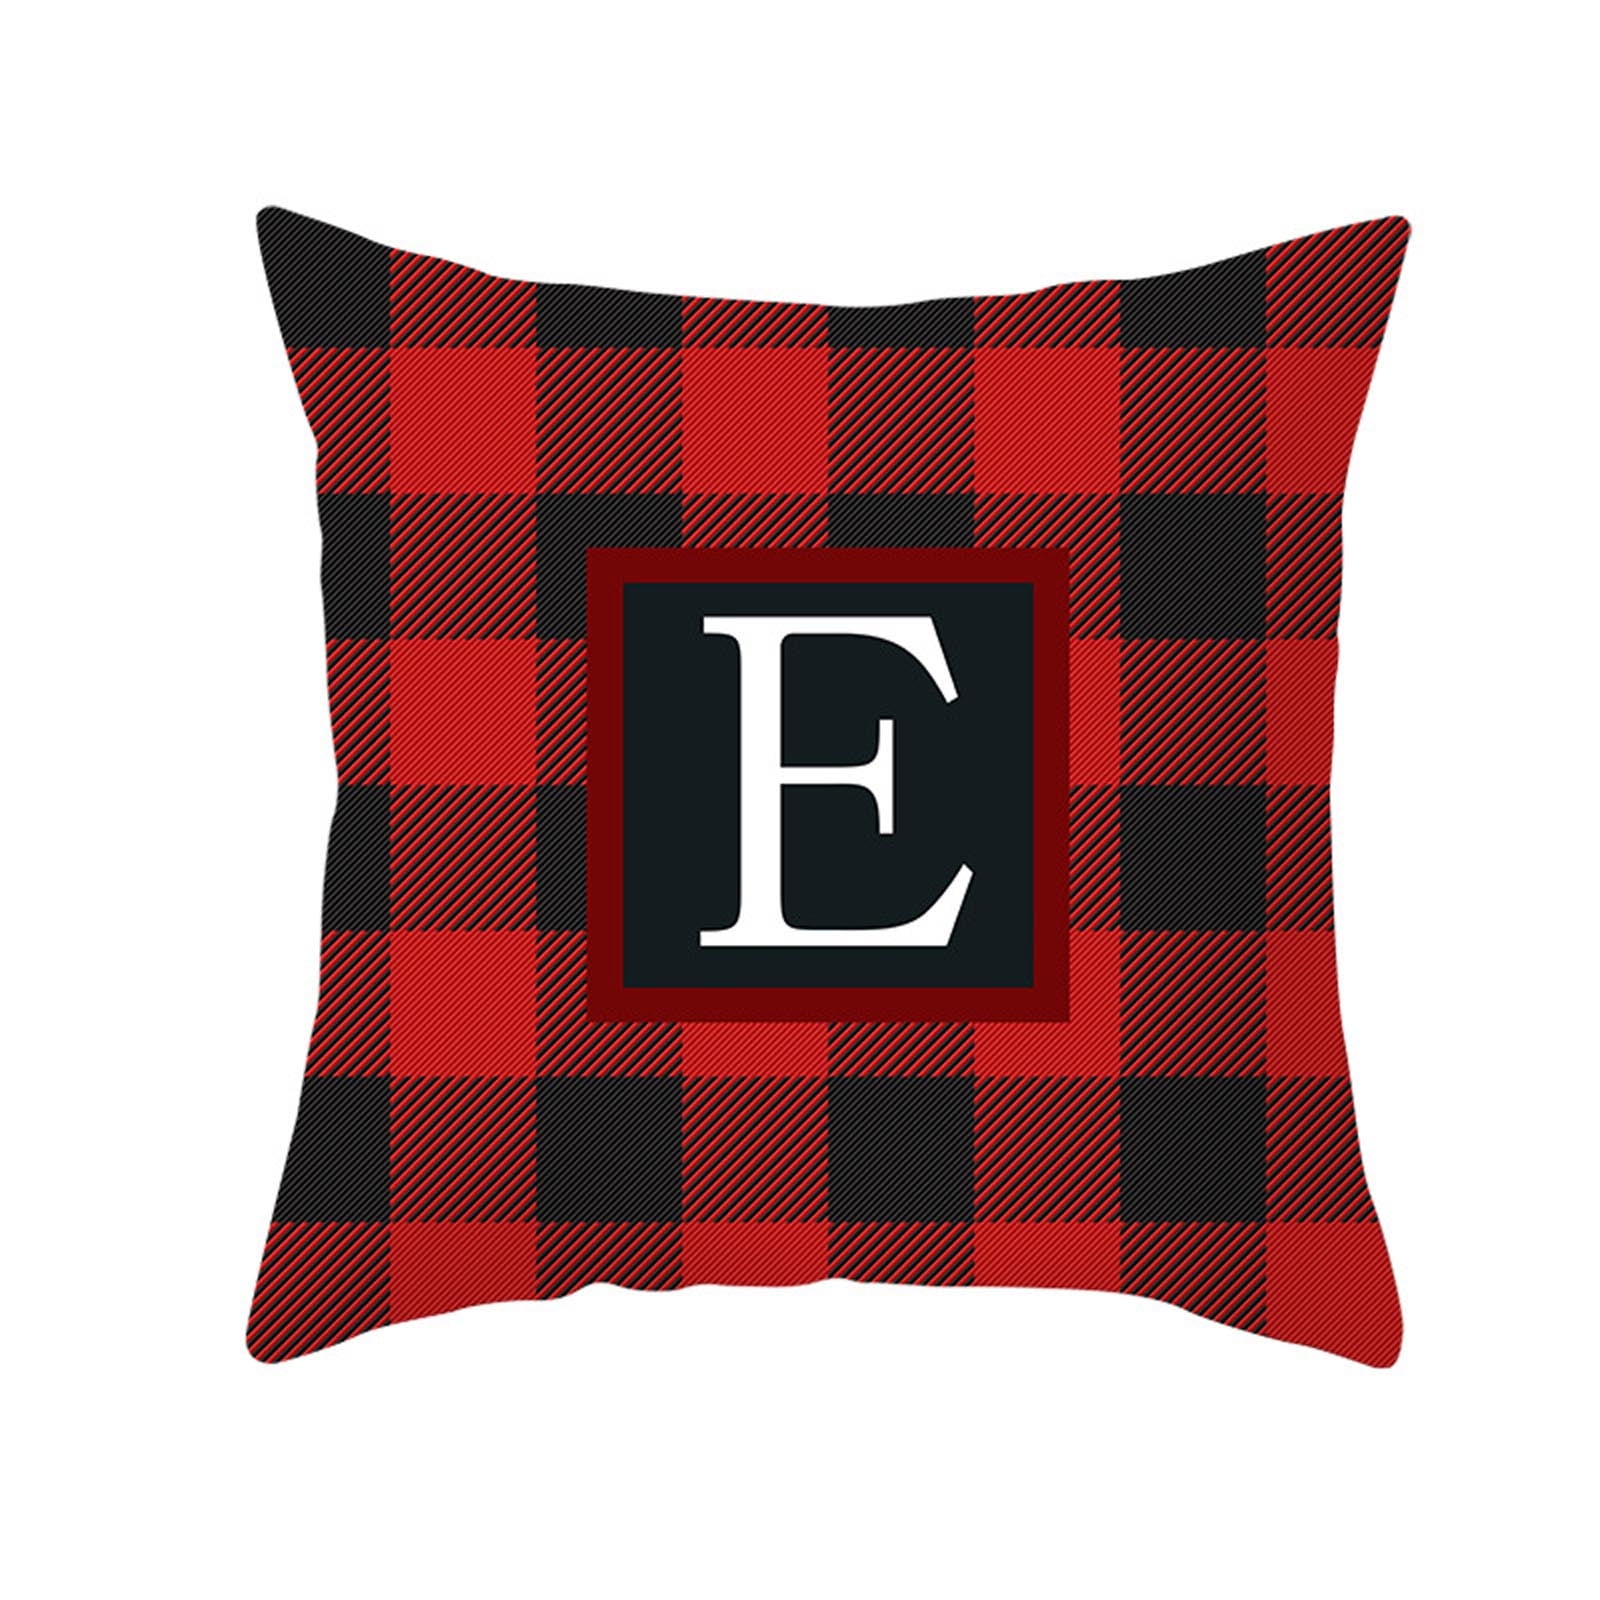 Clearance! EQWLJWE Red and Black Buffalo Check Plaid Pillow Cover ...